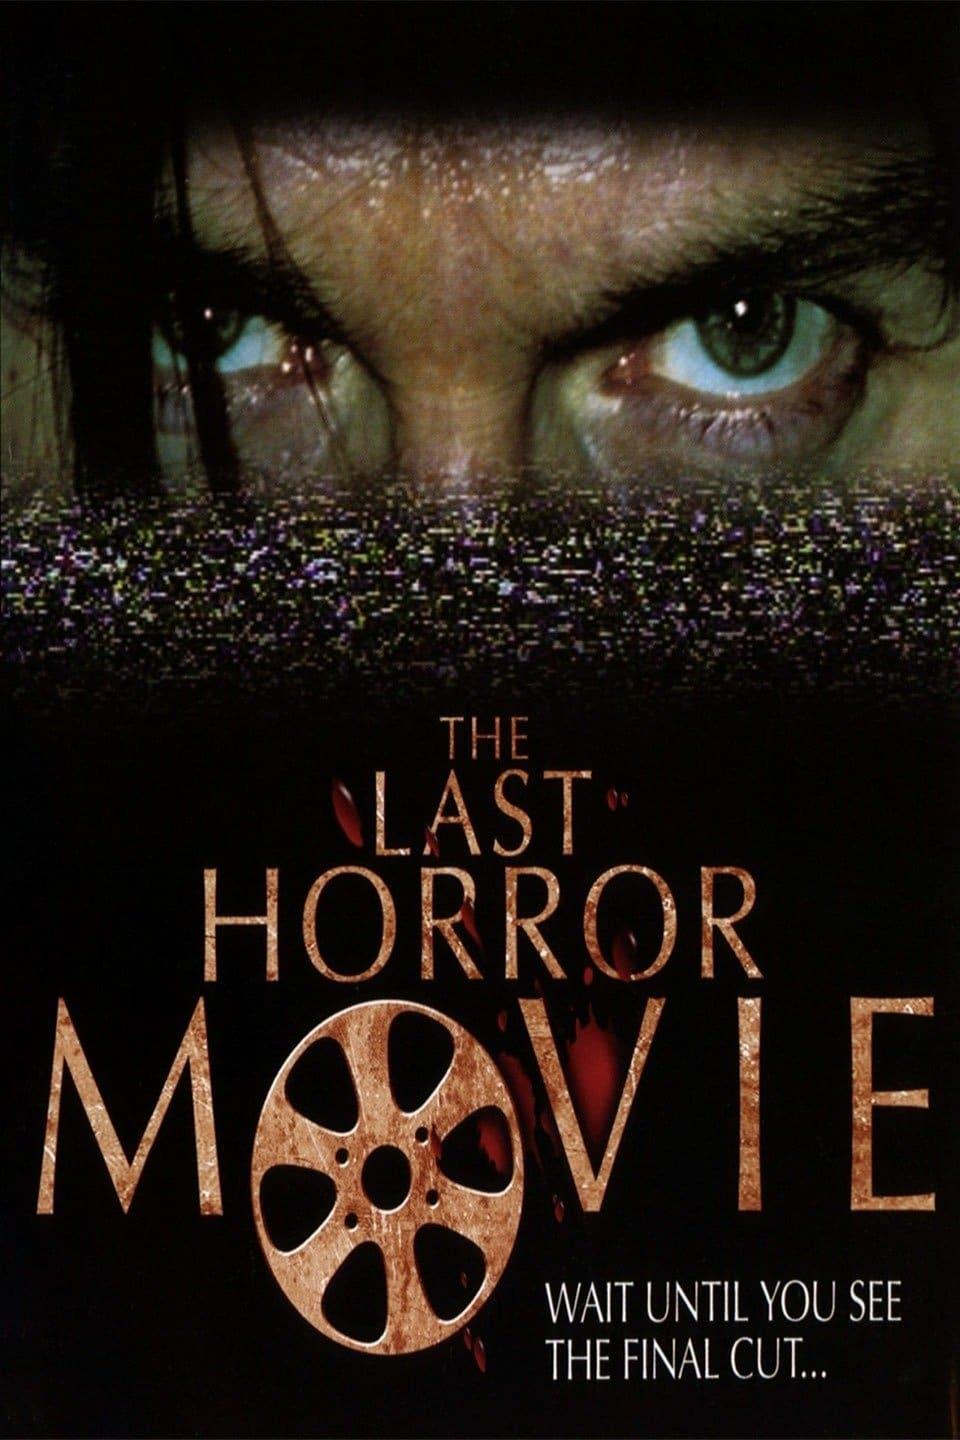 The Last Horror Movie poster